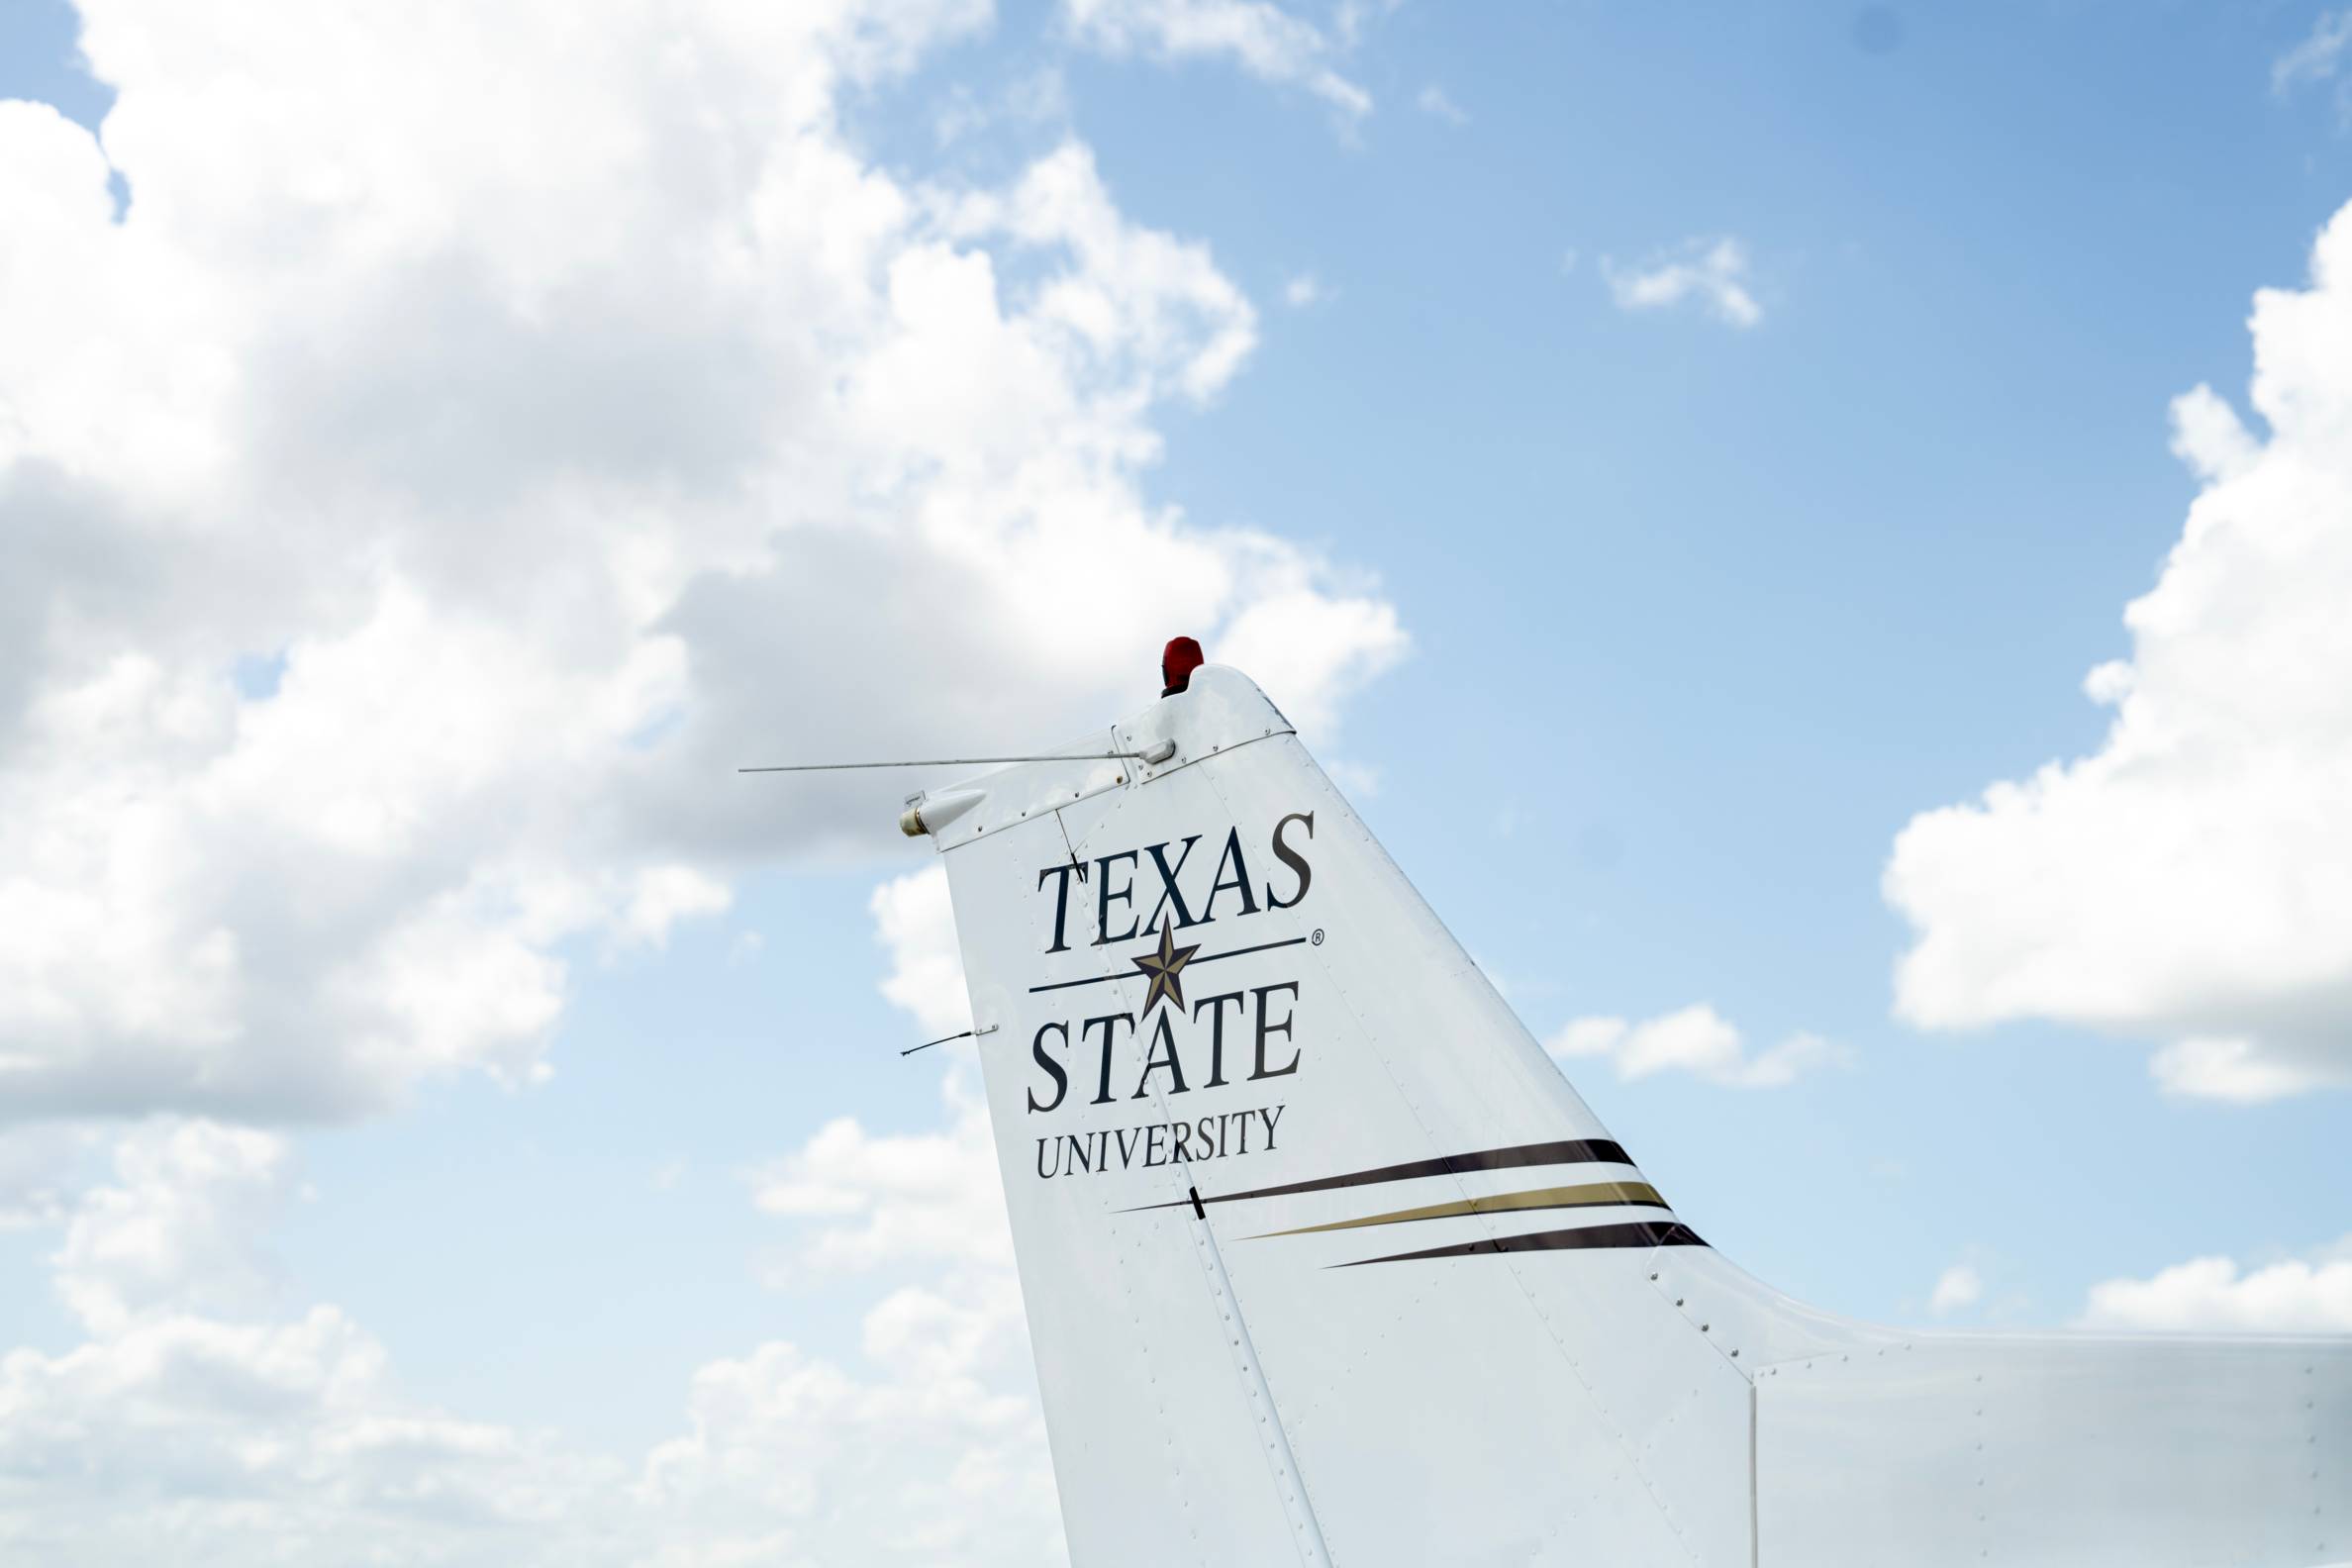 Tail on plane with Texas State University name and logo